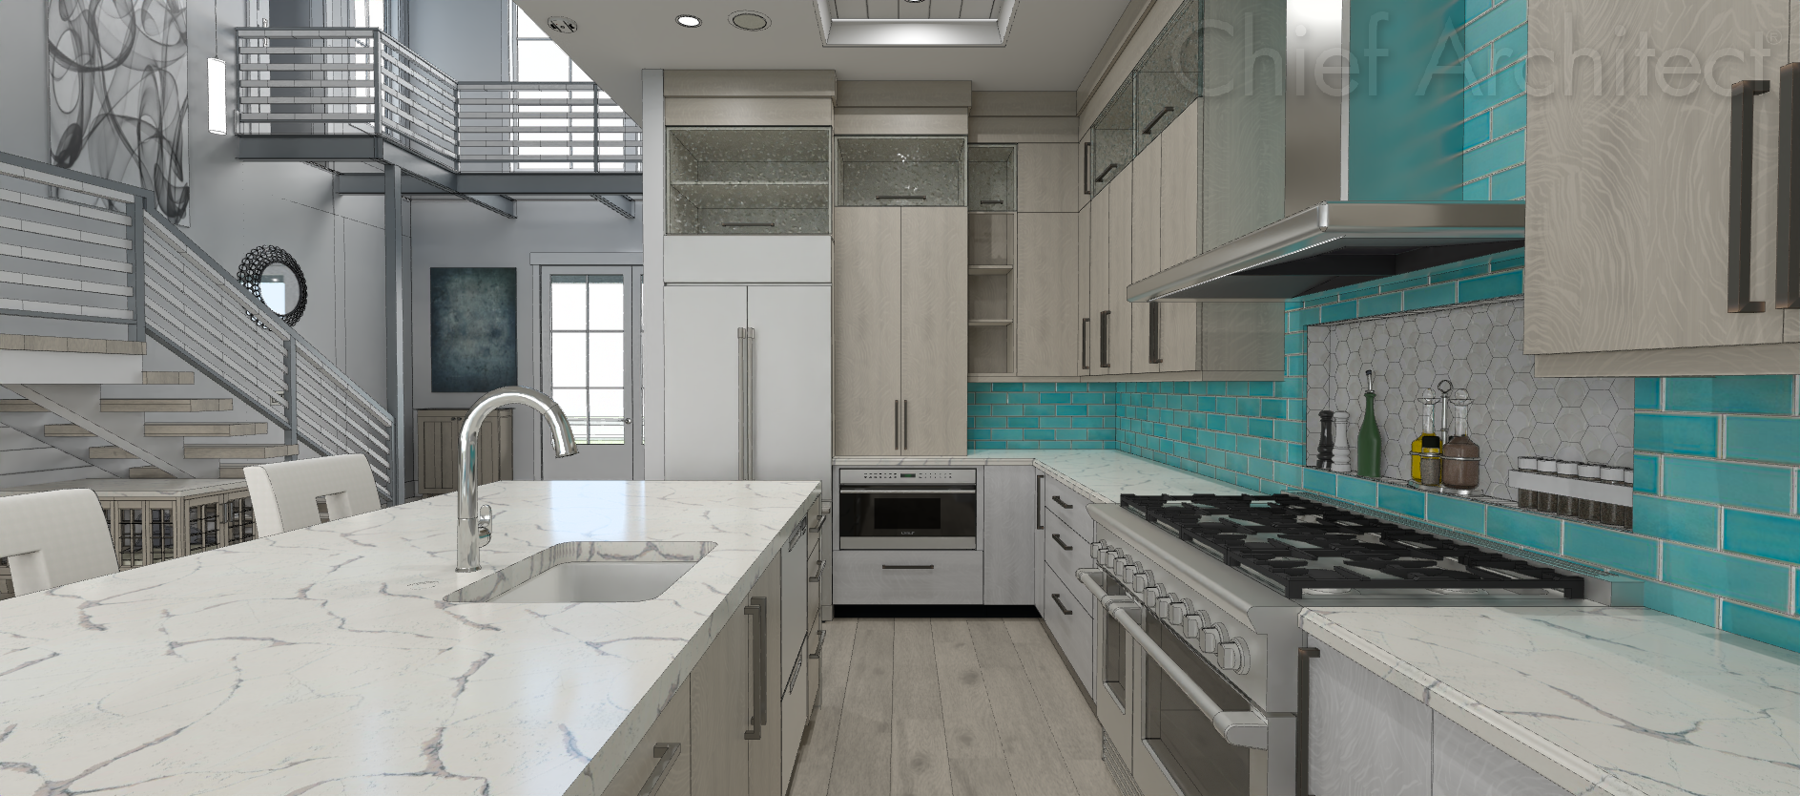 A kitchen designed in Chief Architect with appliance and material selection package number 2 chosen.